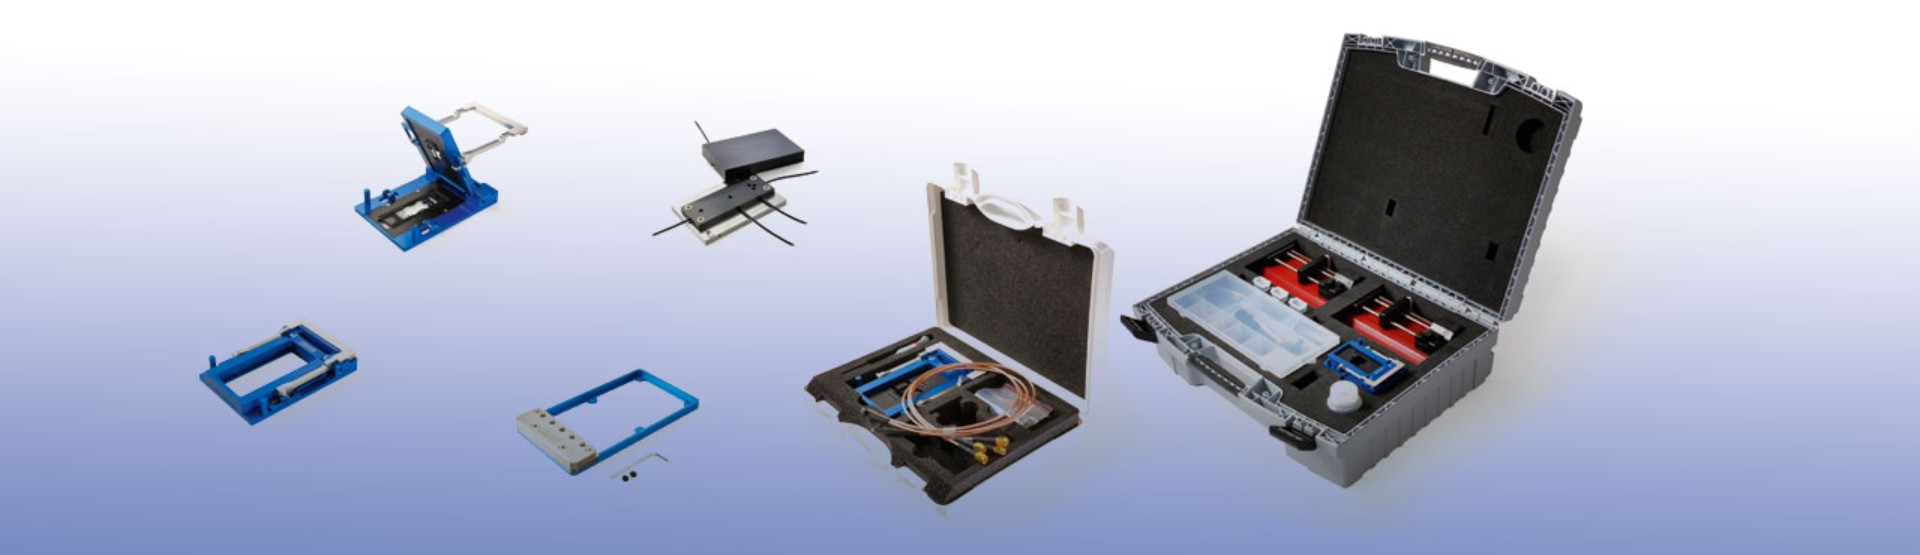 Overview of microfluidic setup systems available in Micronit's web store